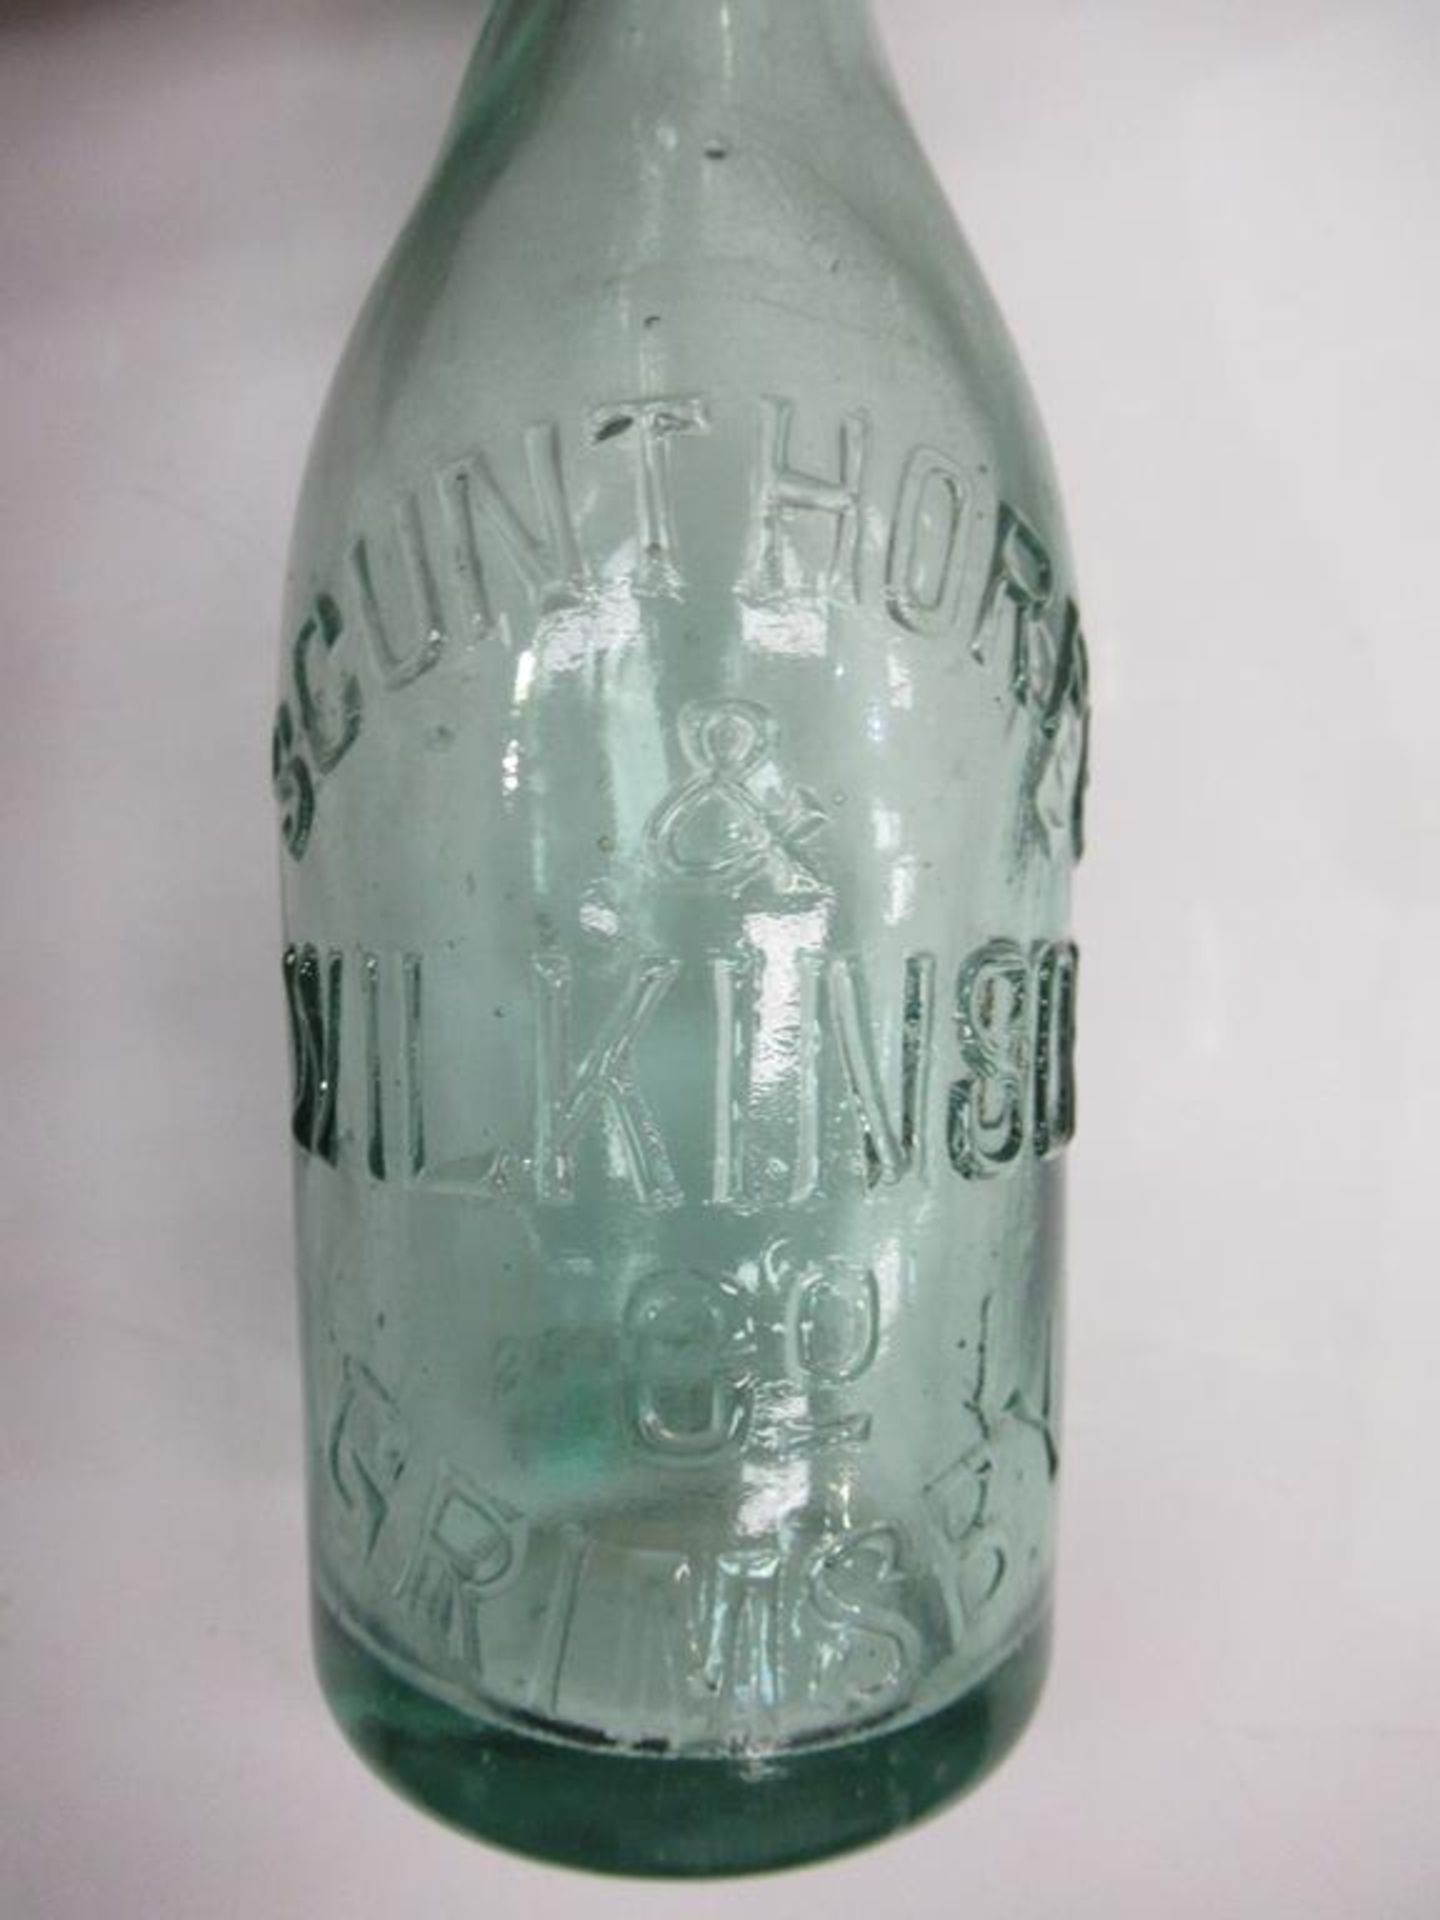 4x Grimsby (3x Scunthorpe) Wilkinsons & Co. bottles - Image 6 of 14